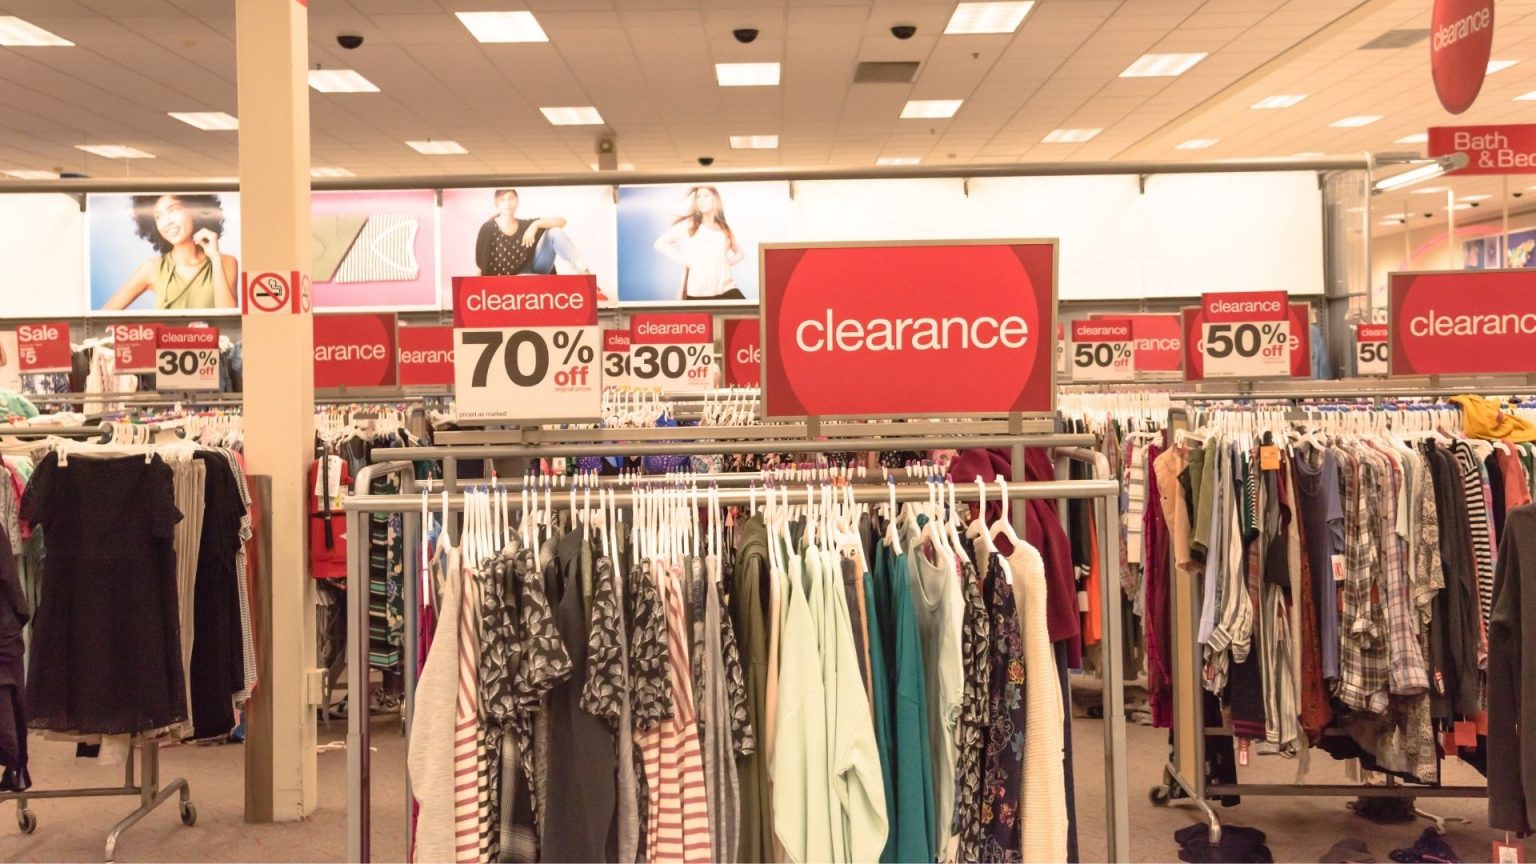 TheGlobalDisplaySolutions 69669 Clearance Sections Retail Image1 1536x864 